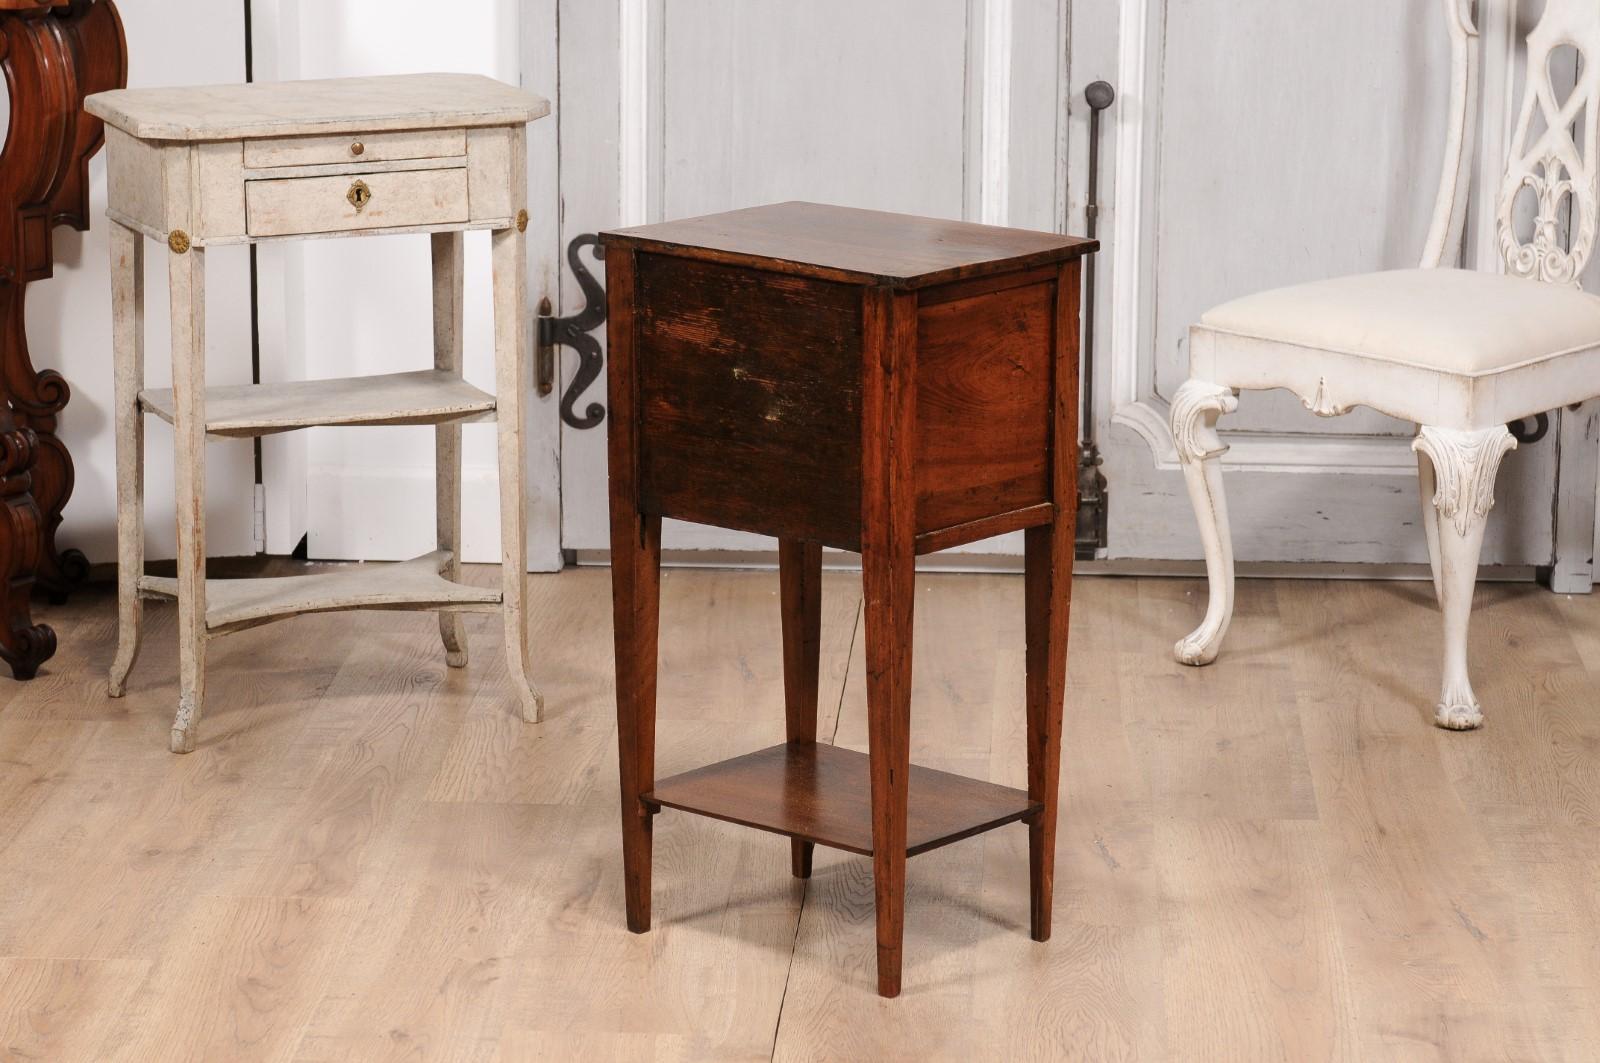 18th Century Italian Walnut Bedside Table with Three Drawers and Tapering Legs For Sale 4